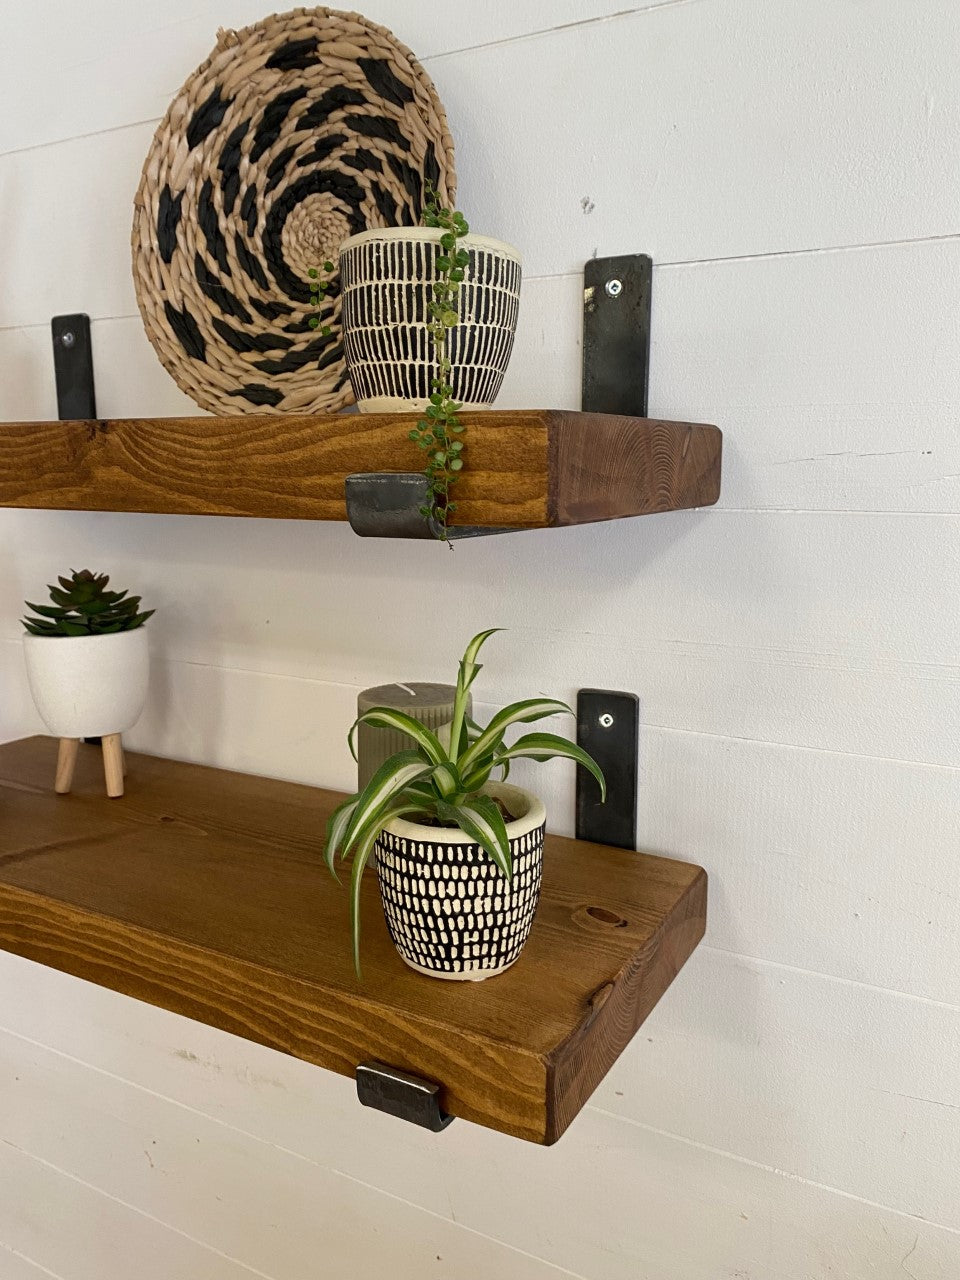 Industrial Style Shelves - Up Brackets